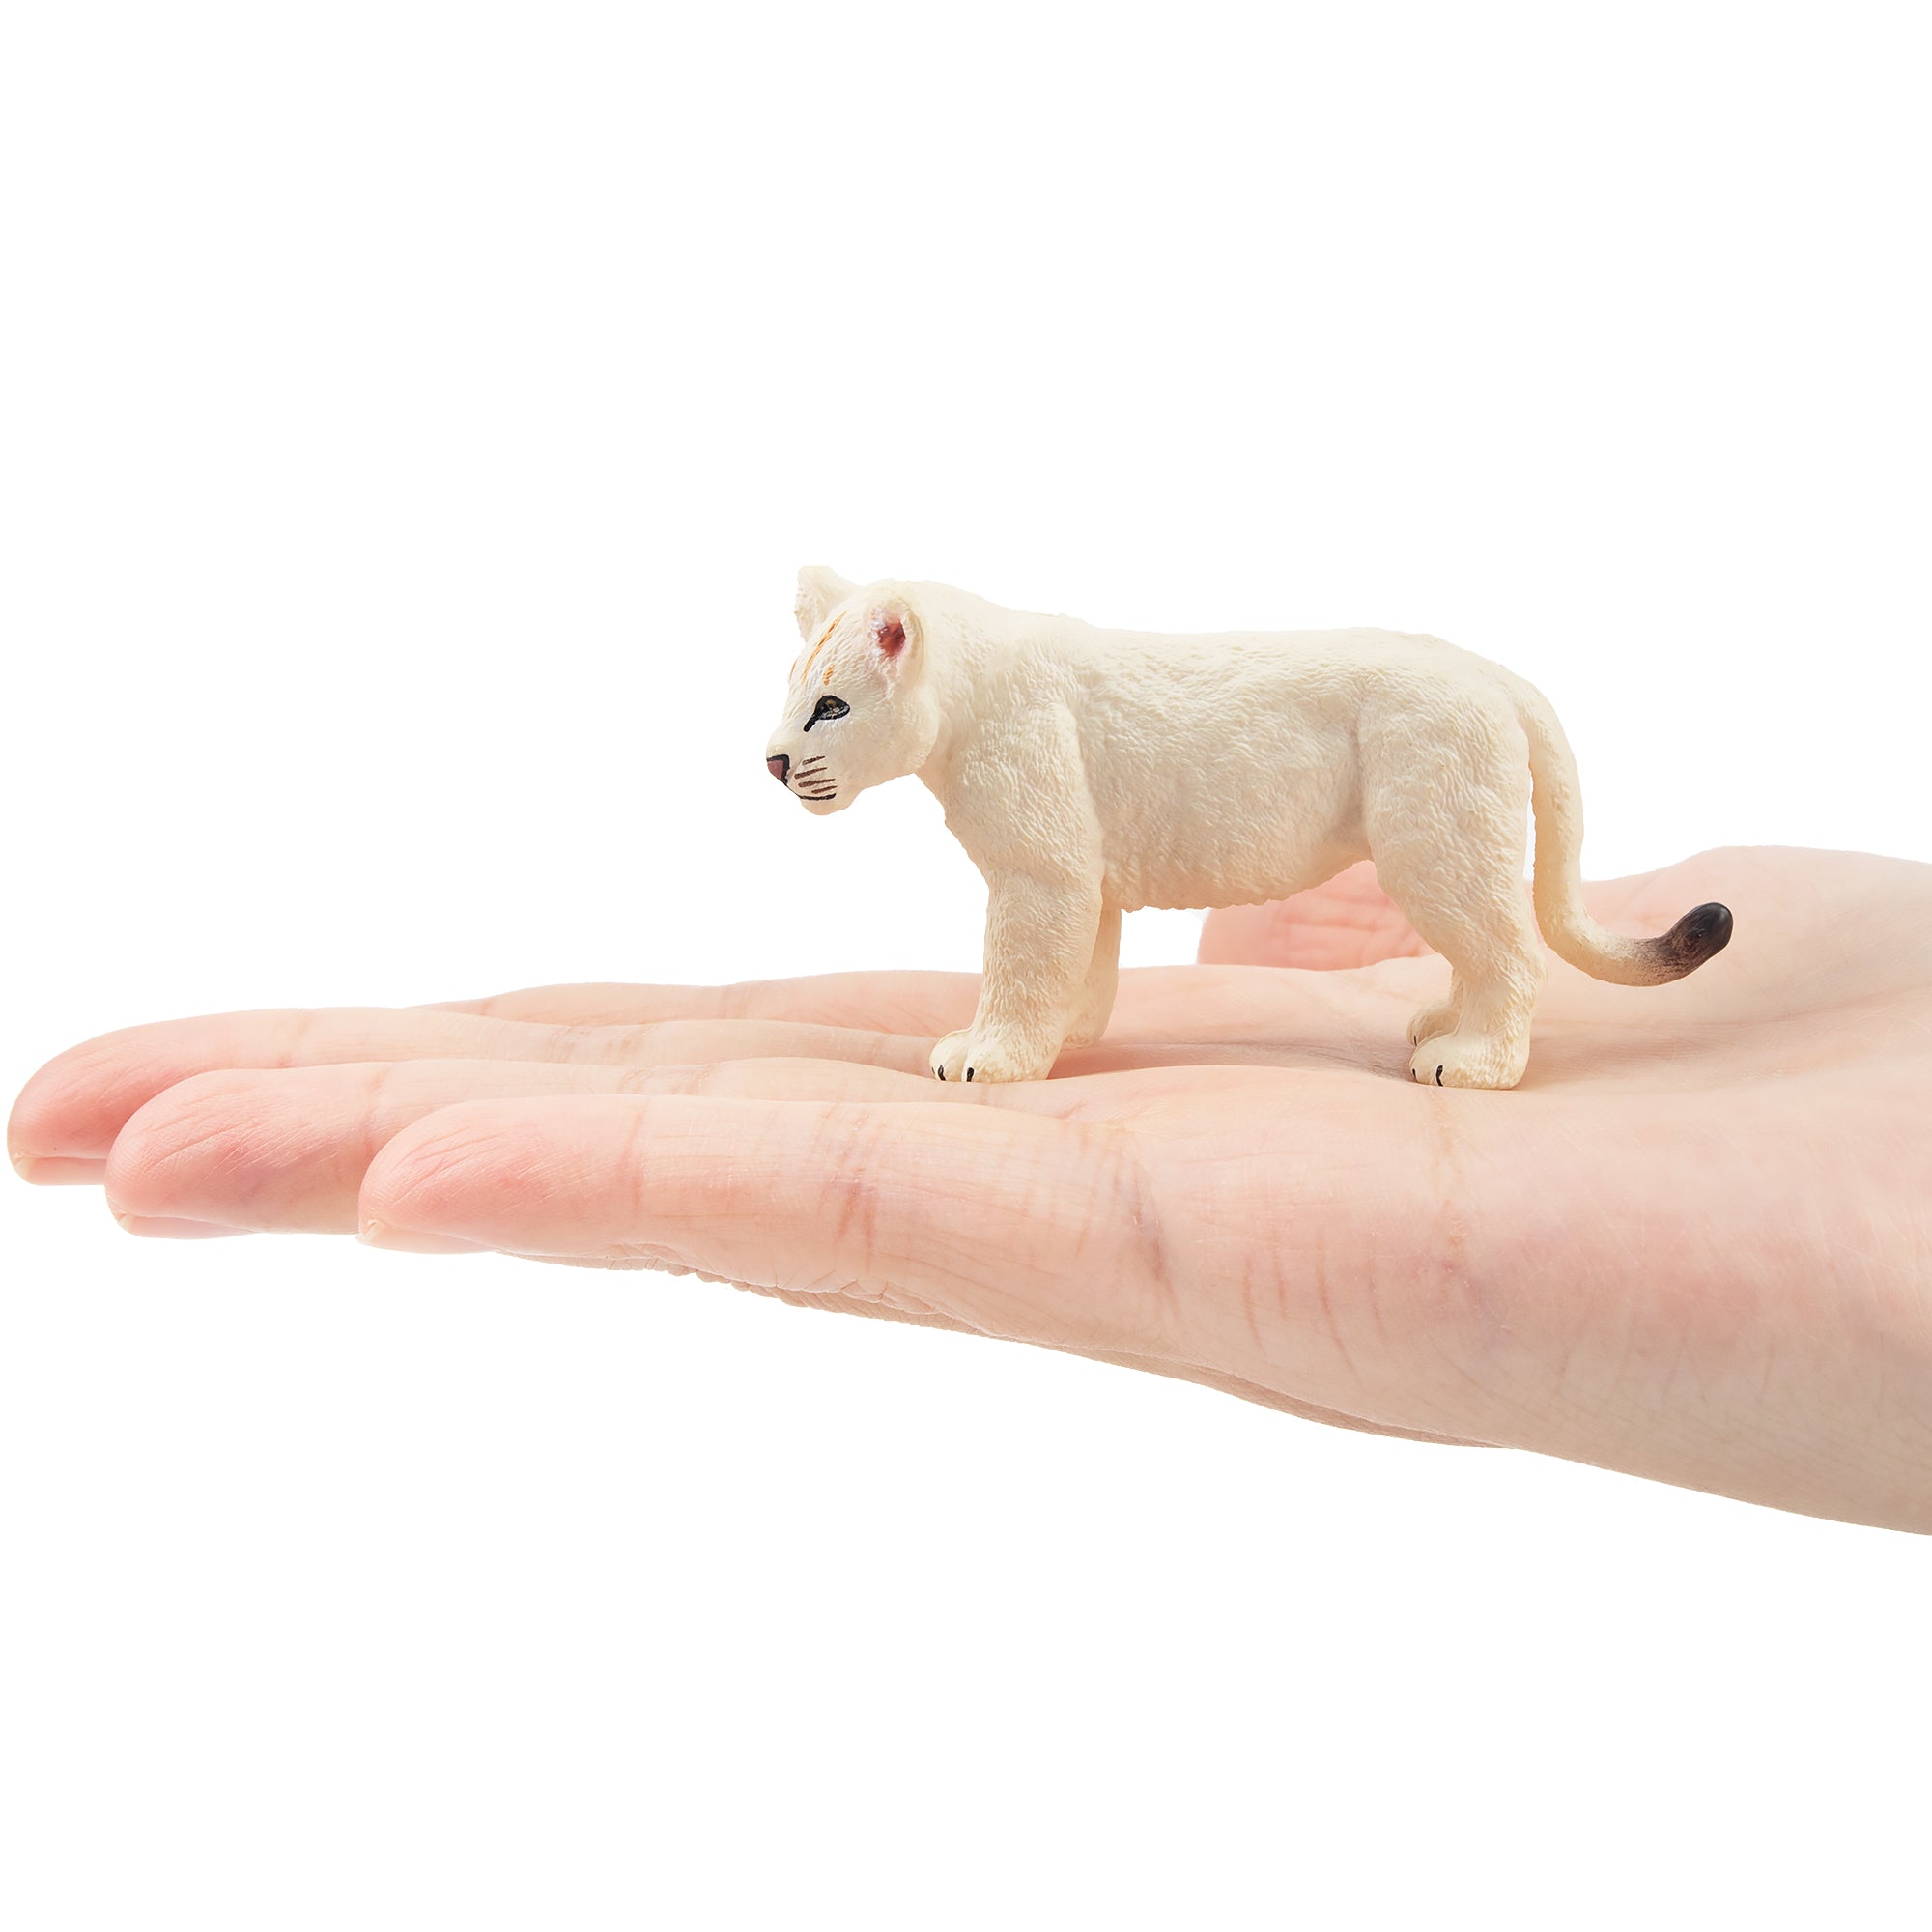 Toymany Standing White Lion Cub Figurine Toy-on hand